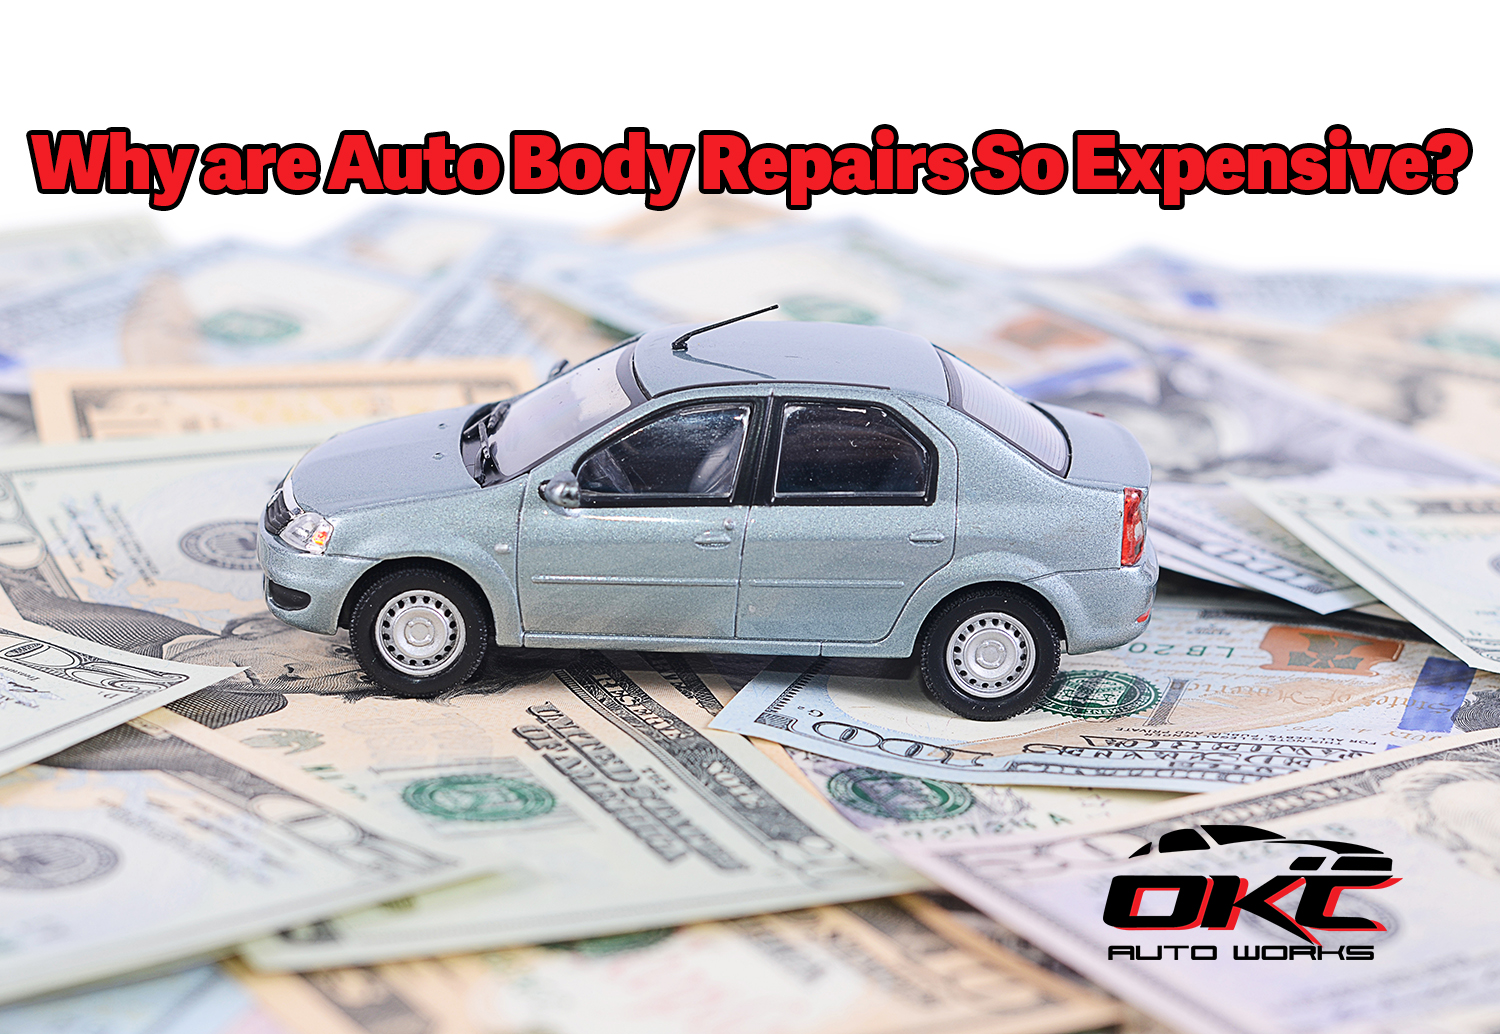 auto body repairs so expensive, why is auto body so expensive, collision repair expenses, why so high